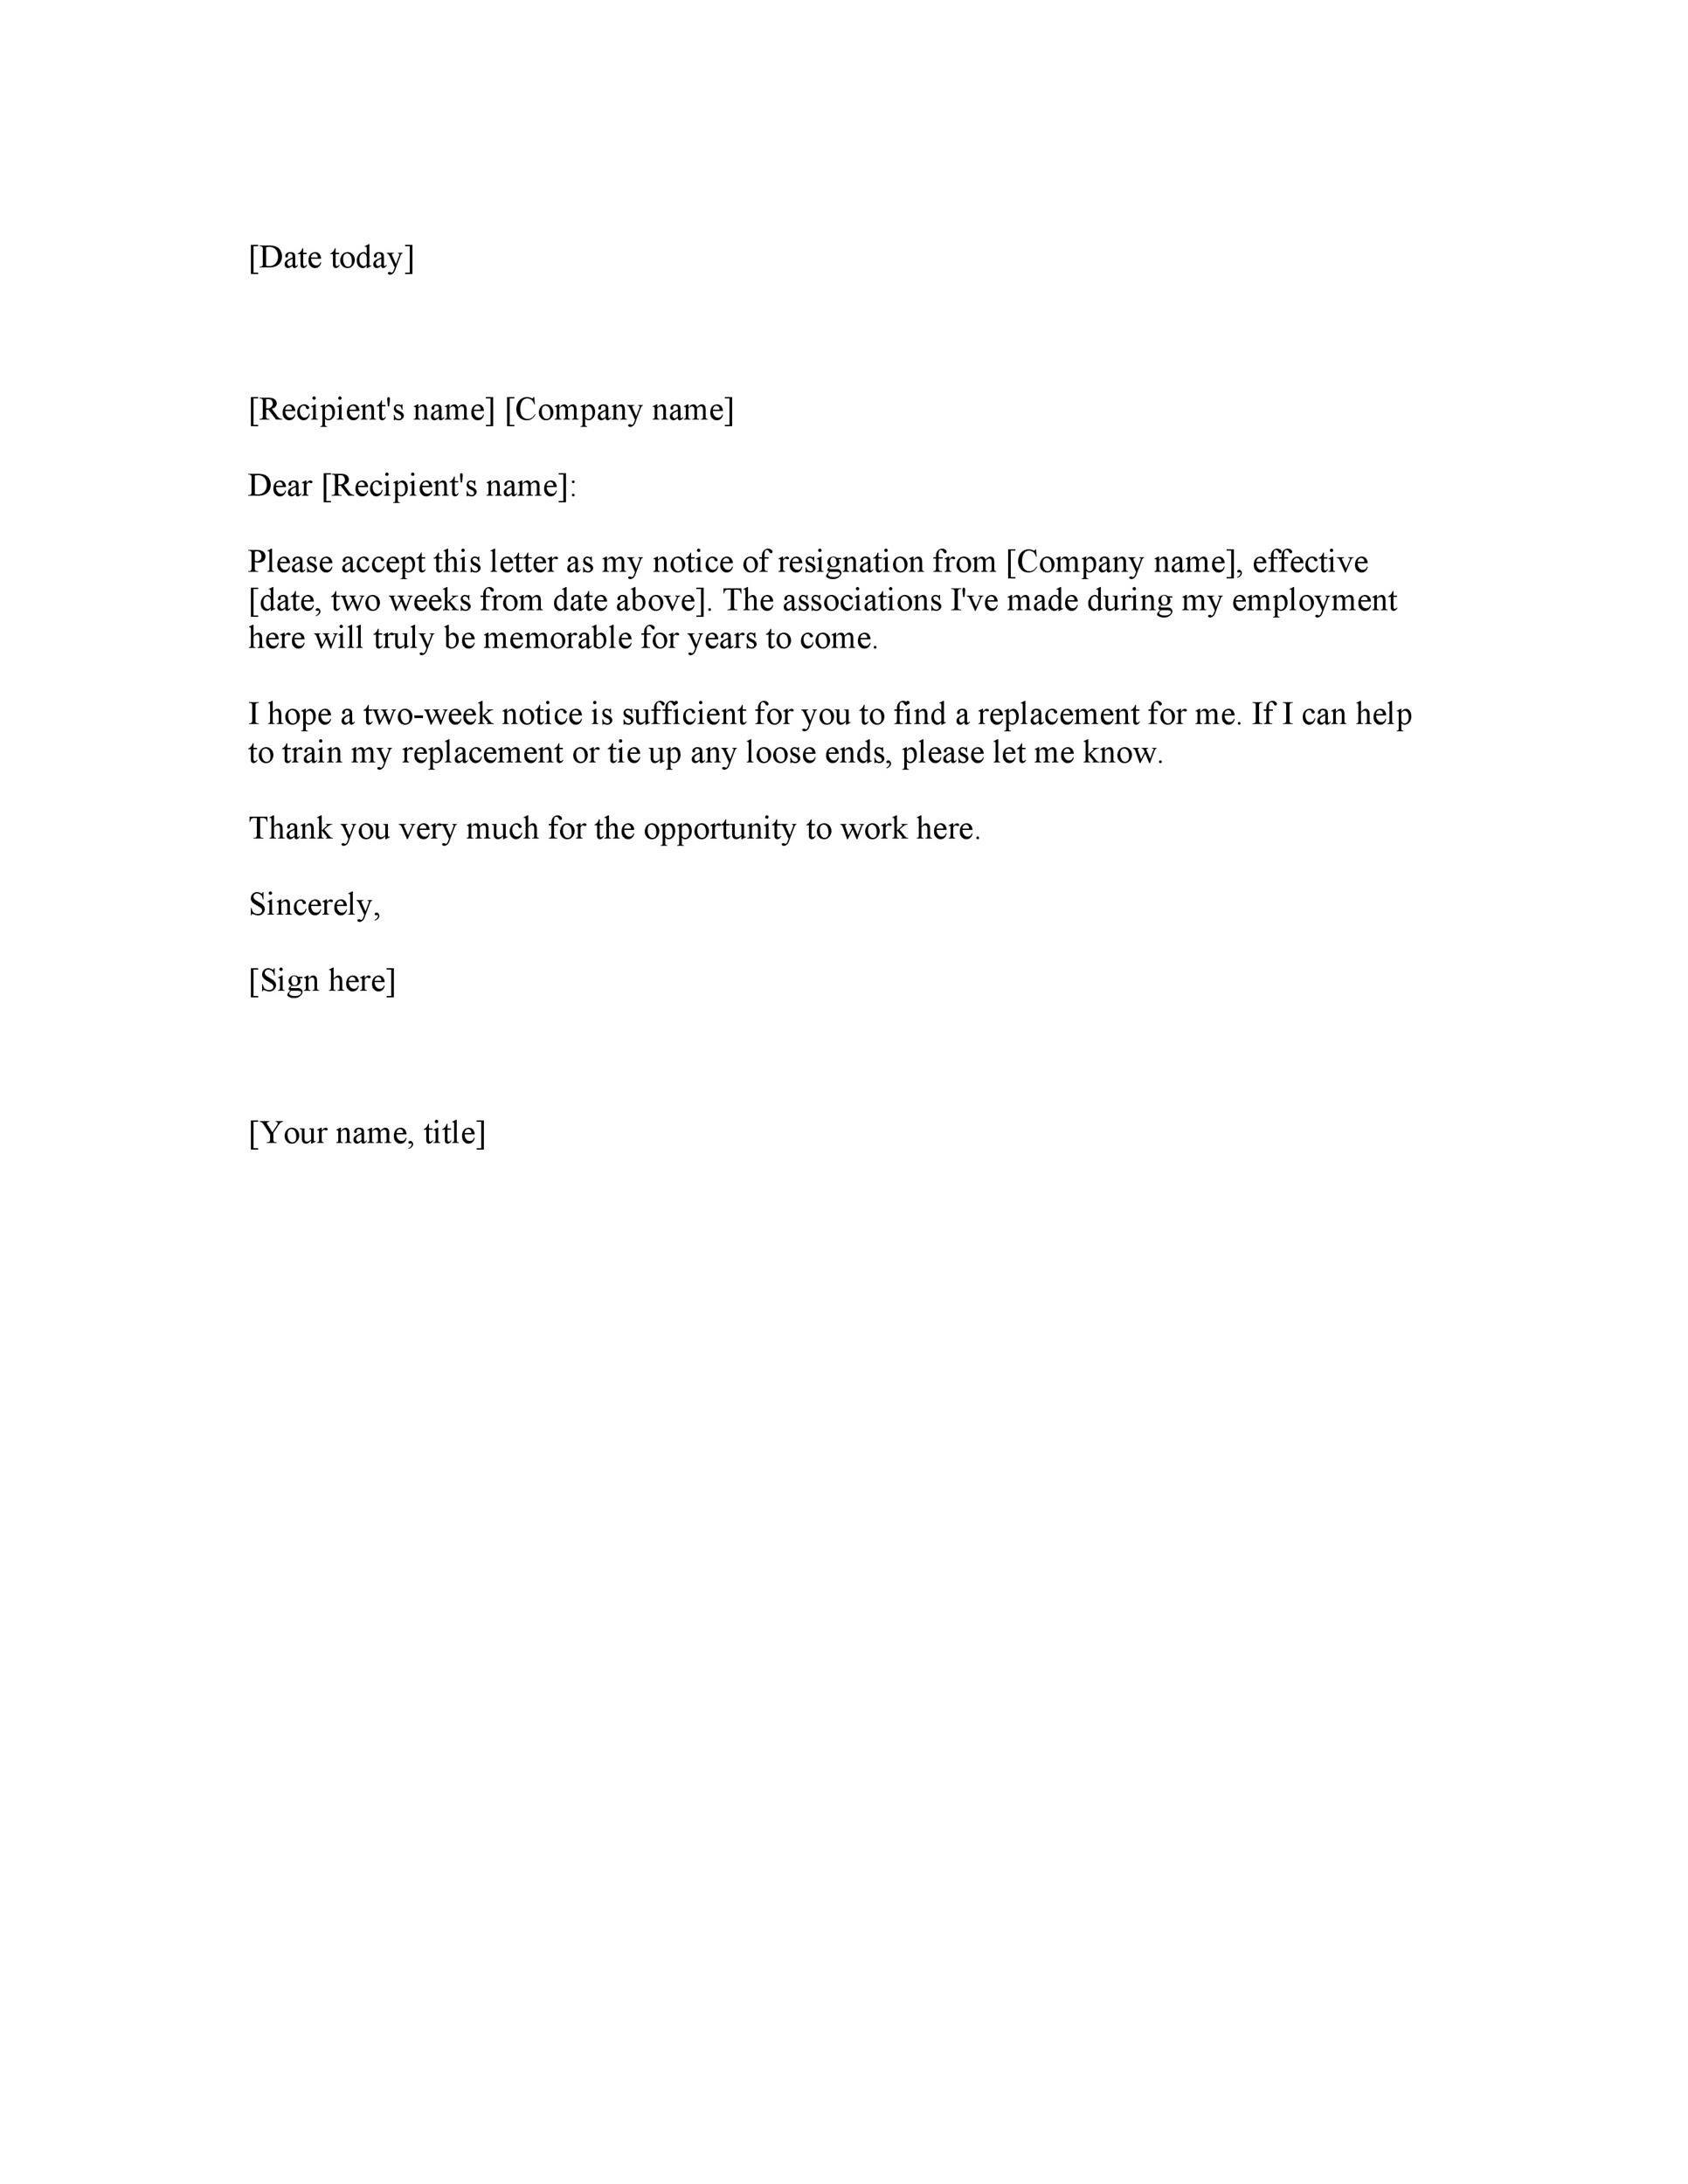 Formal 2 Weeks Notice Letter from templatelab.com